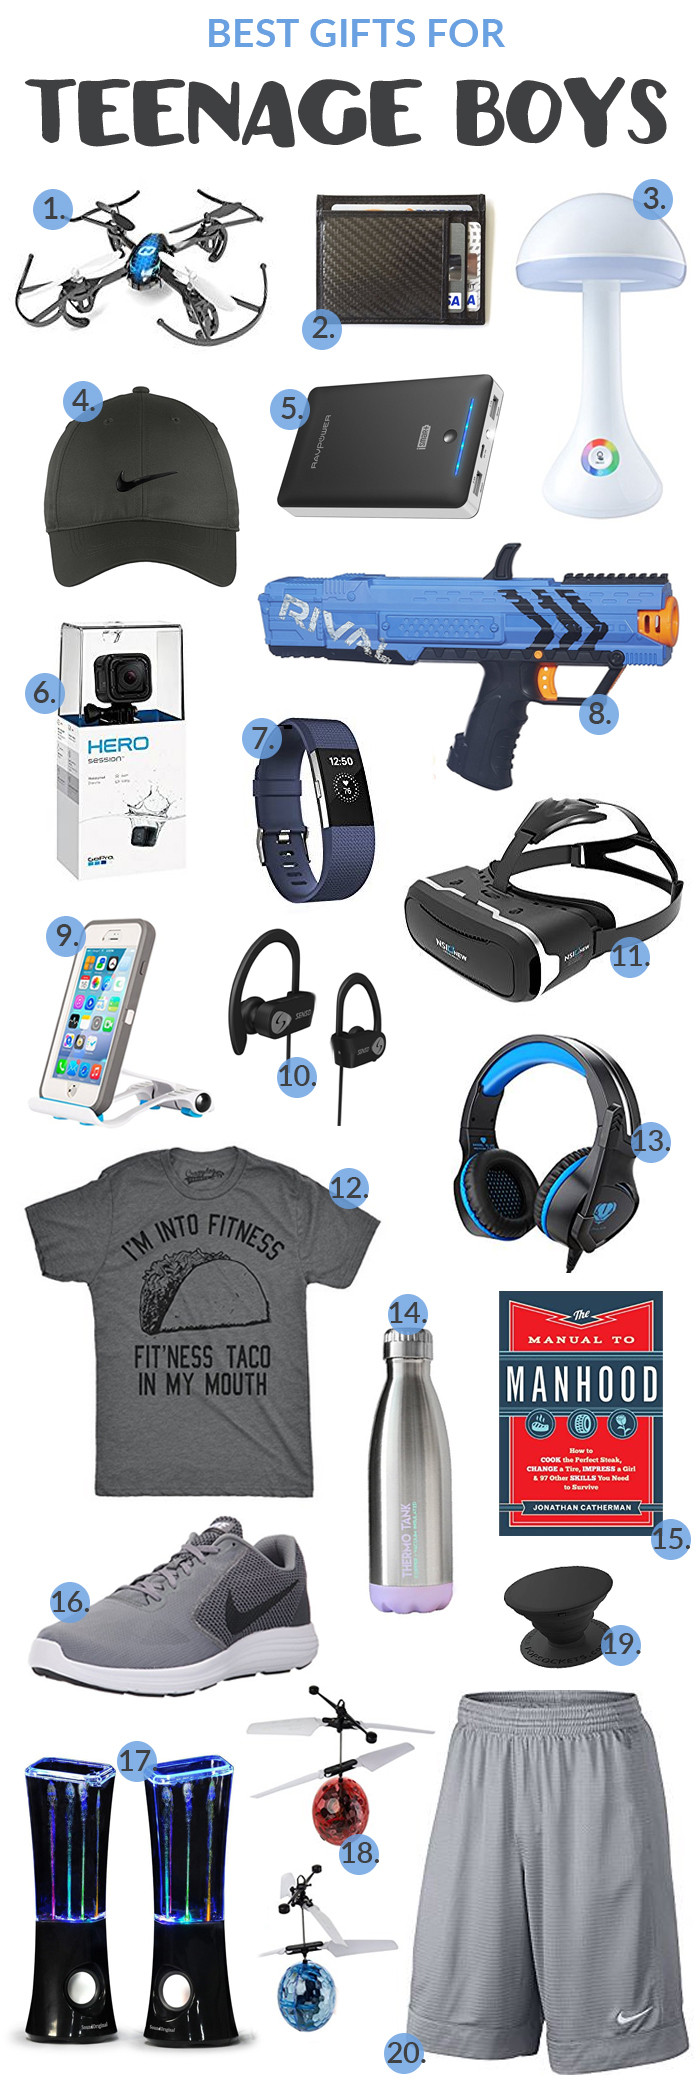 Gift Ideas For Teenager Boys
 Best Gifts for Teenage Boys